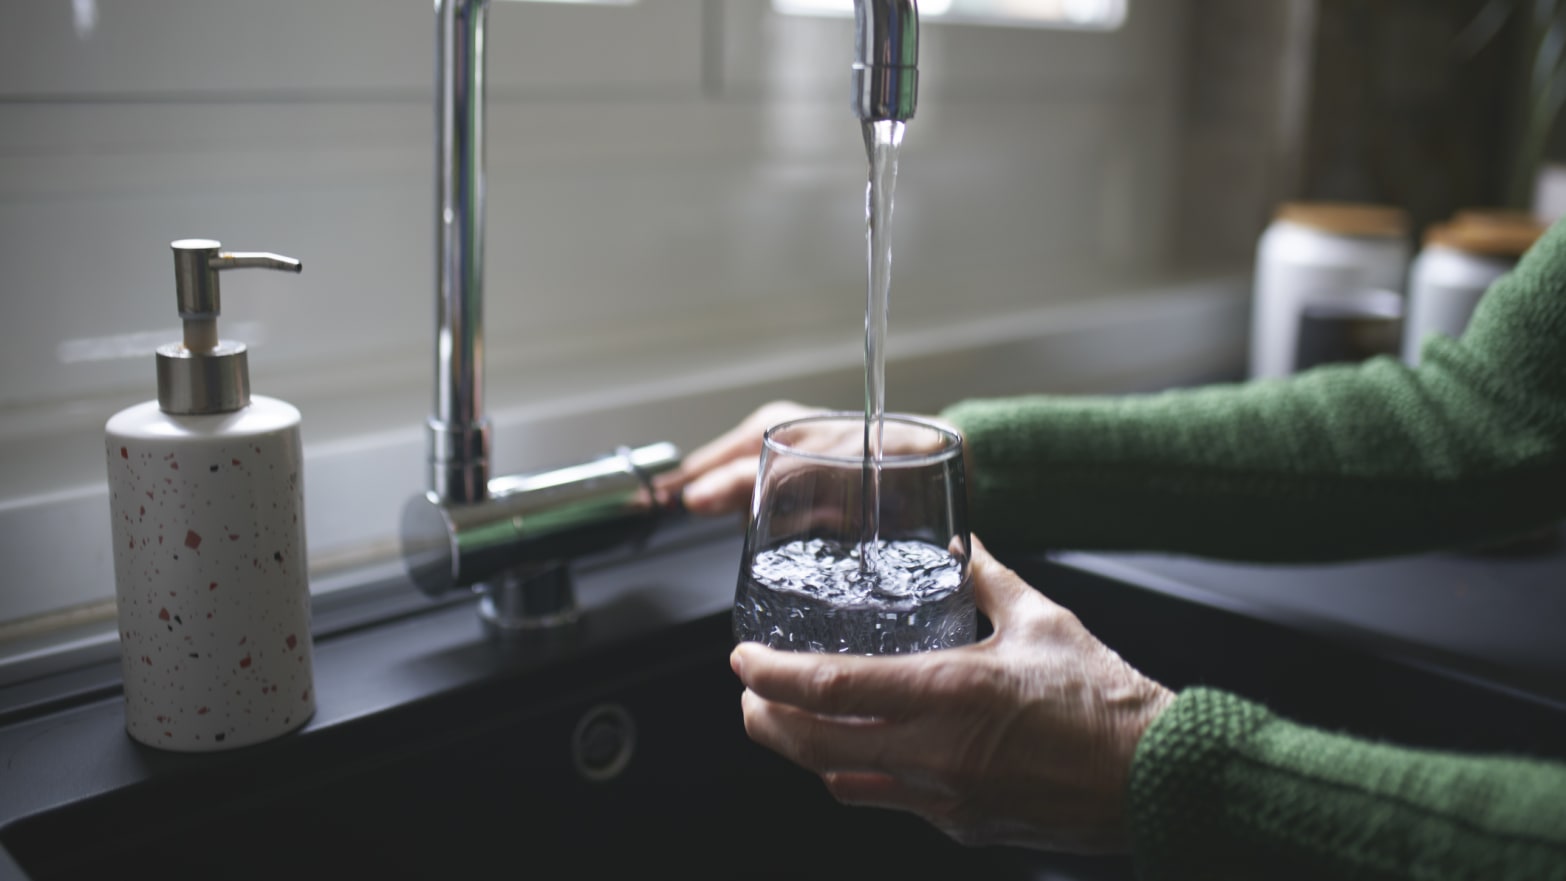 The EPA has announced new limits on the amount of PFAS or “forever chemicals” that water systems can allow in drinking water. 